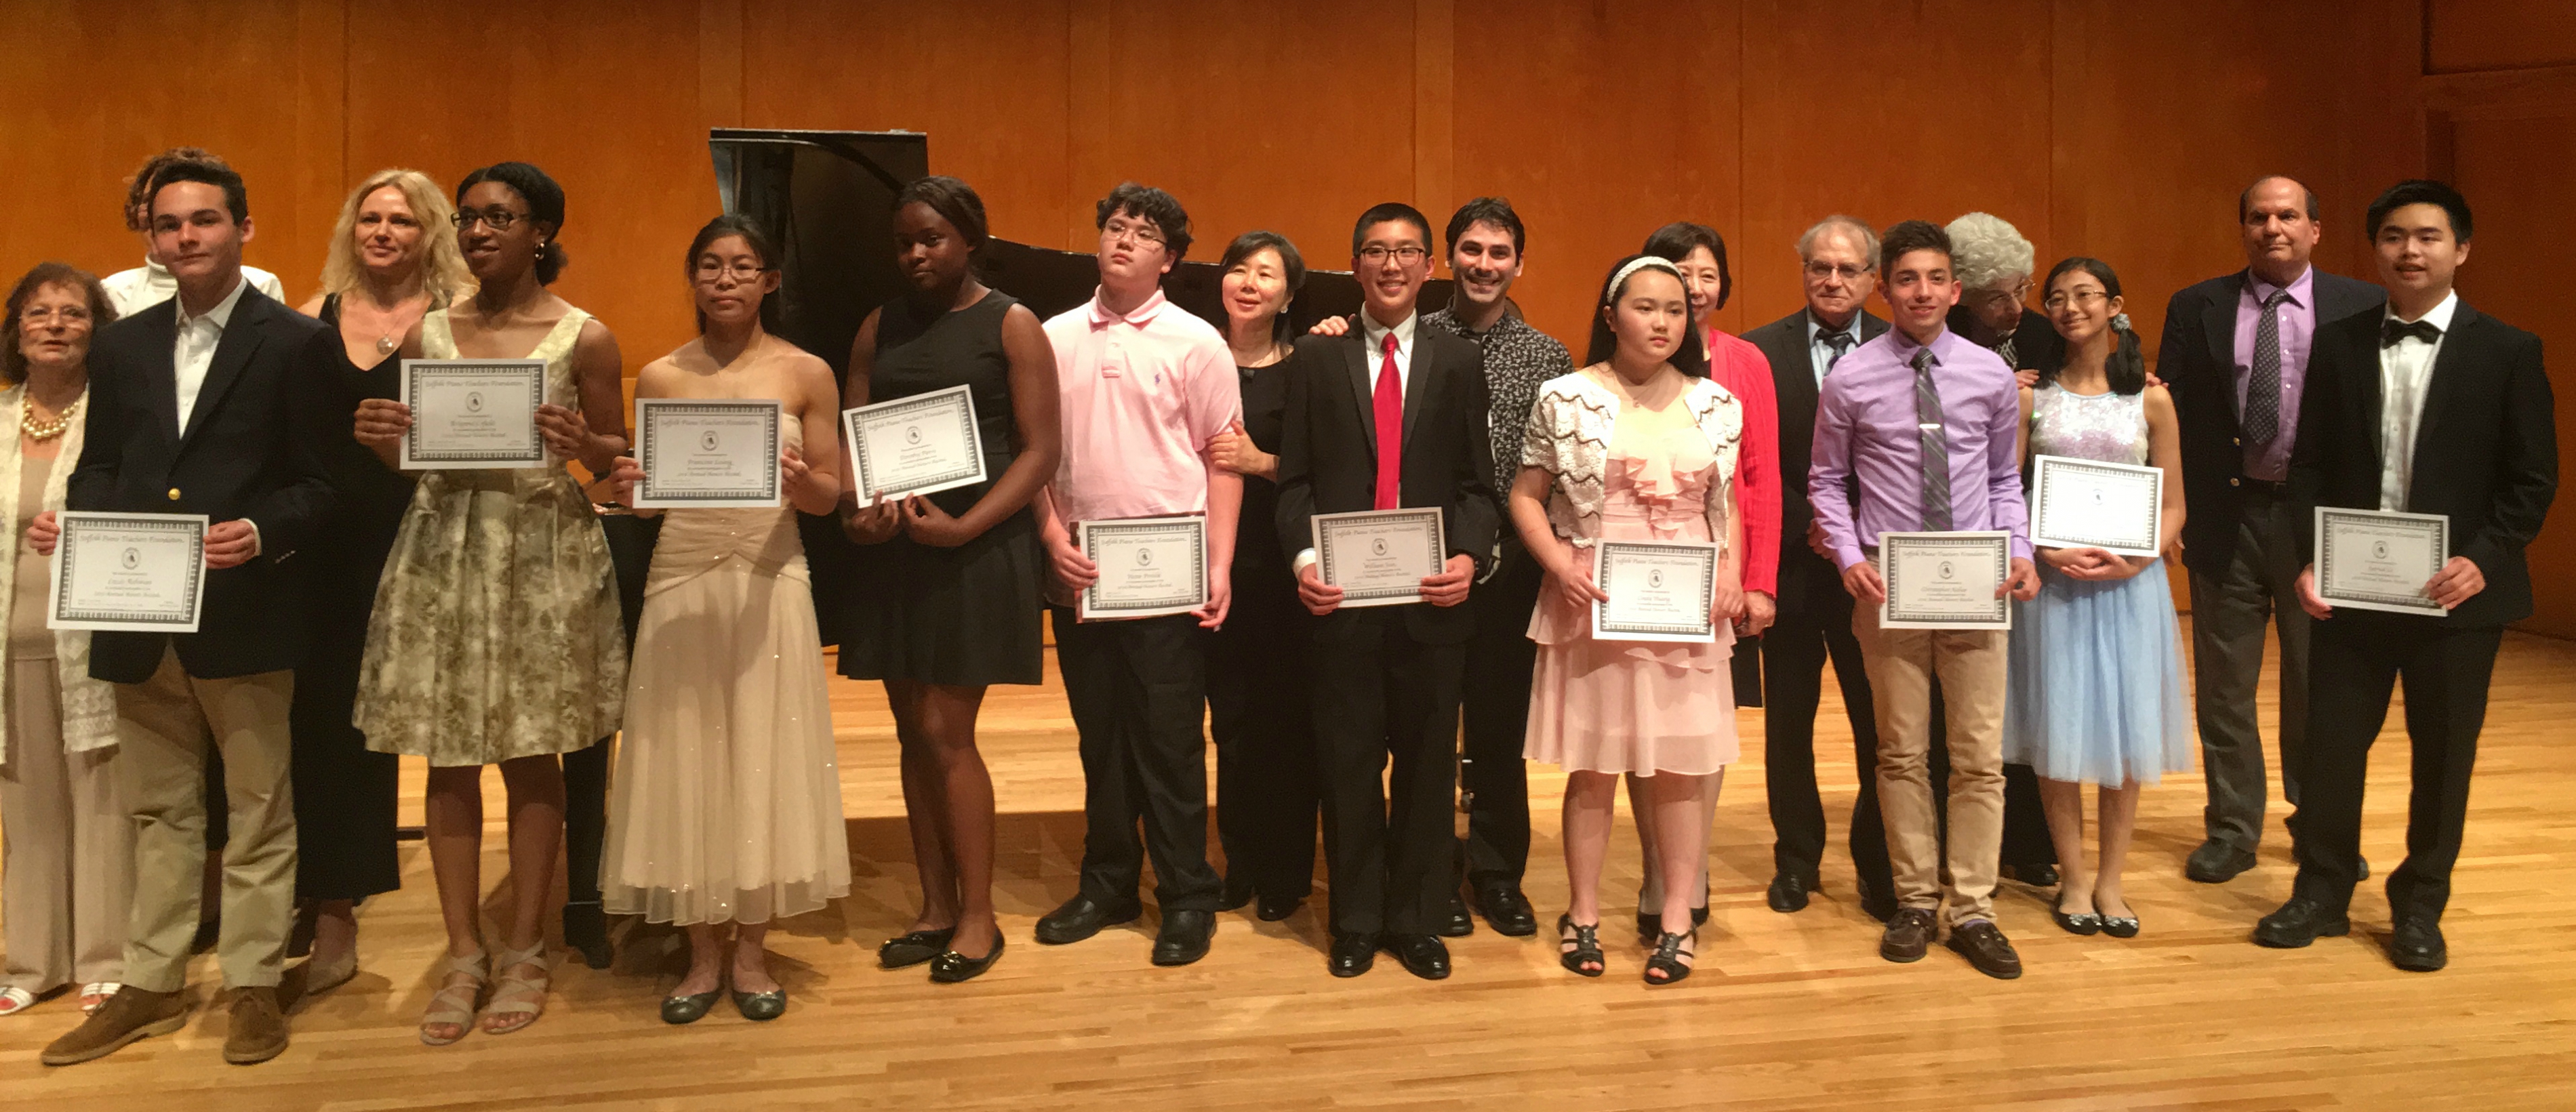 Group picture at the Honors Recital, commemorating all those awarded in the SPTF Competition